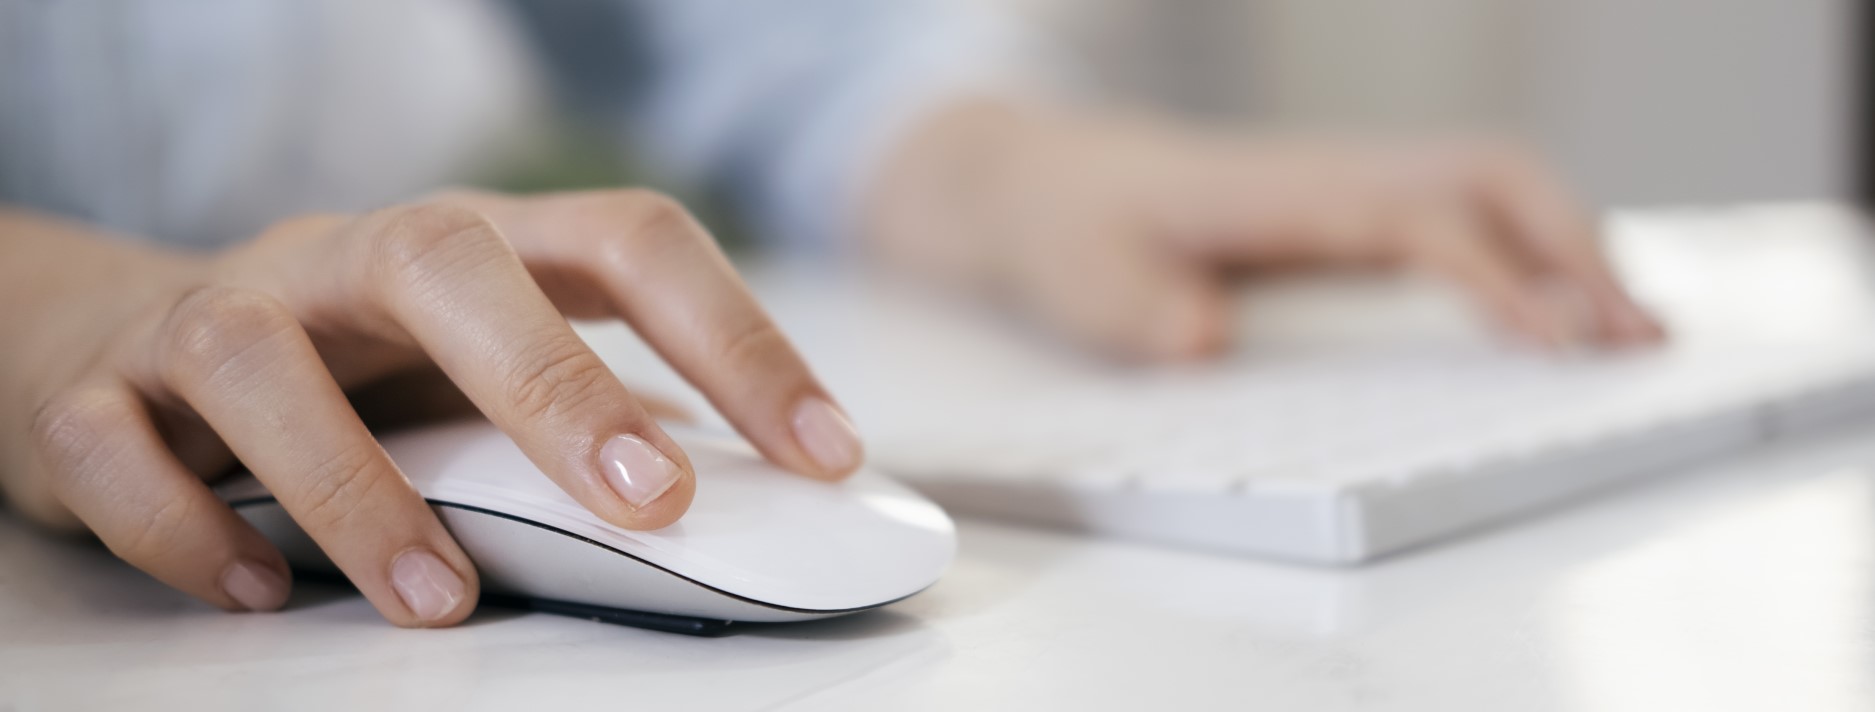 Person clicking around with mouse